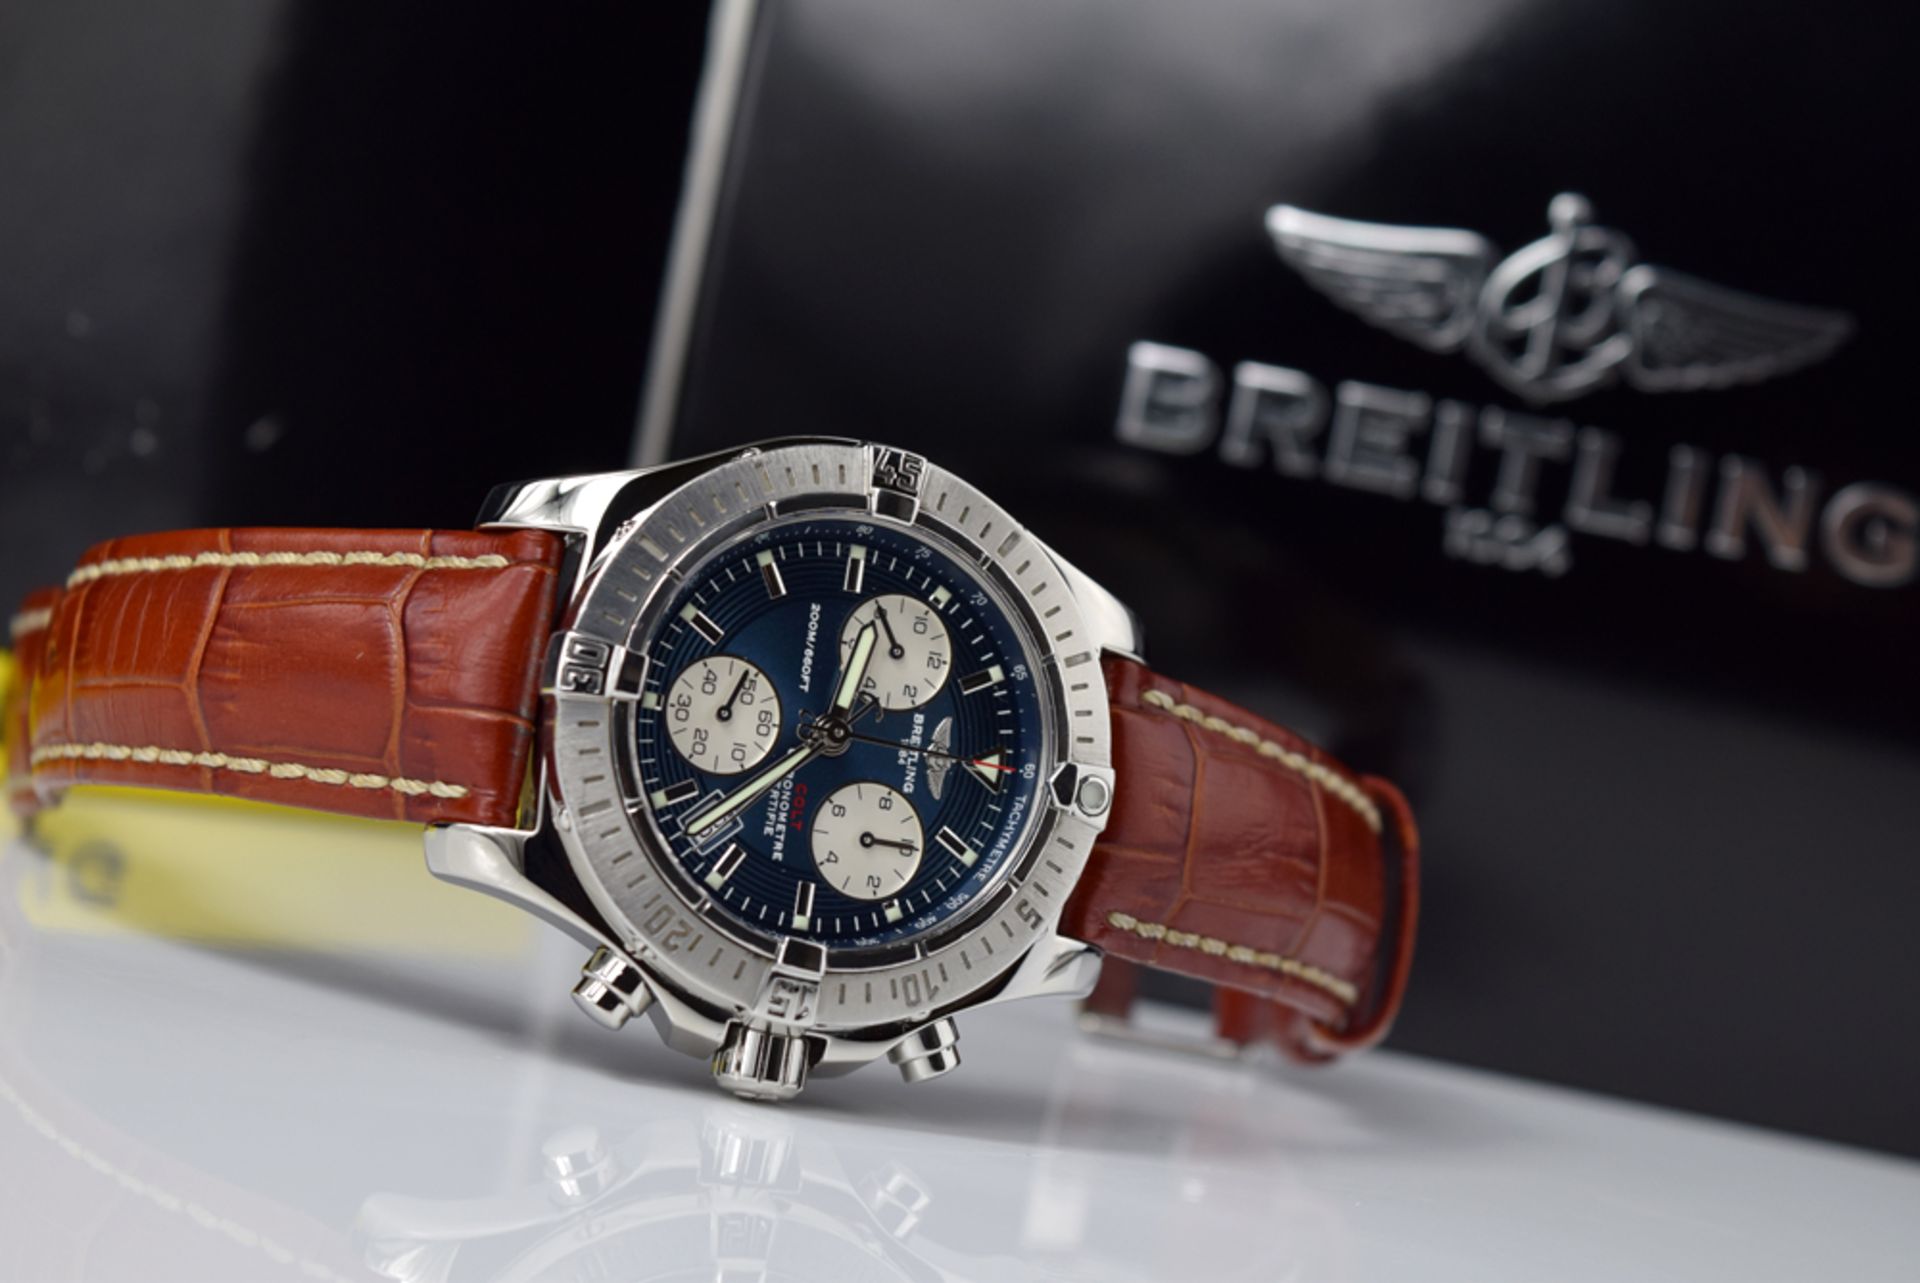 BREITLING CHRONOGRAPH 'COLT' - STEEL (A73380) - Image 7 of 10